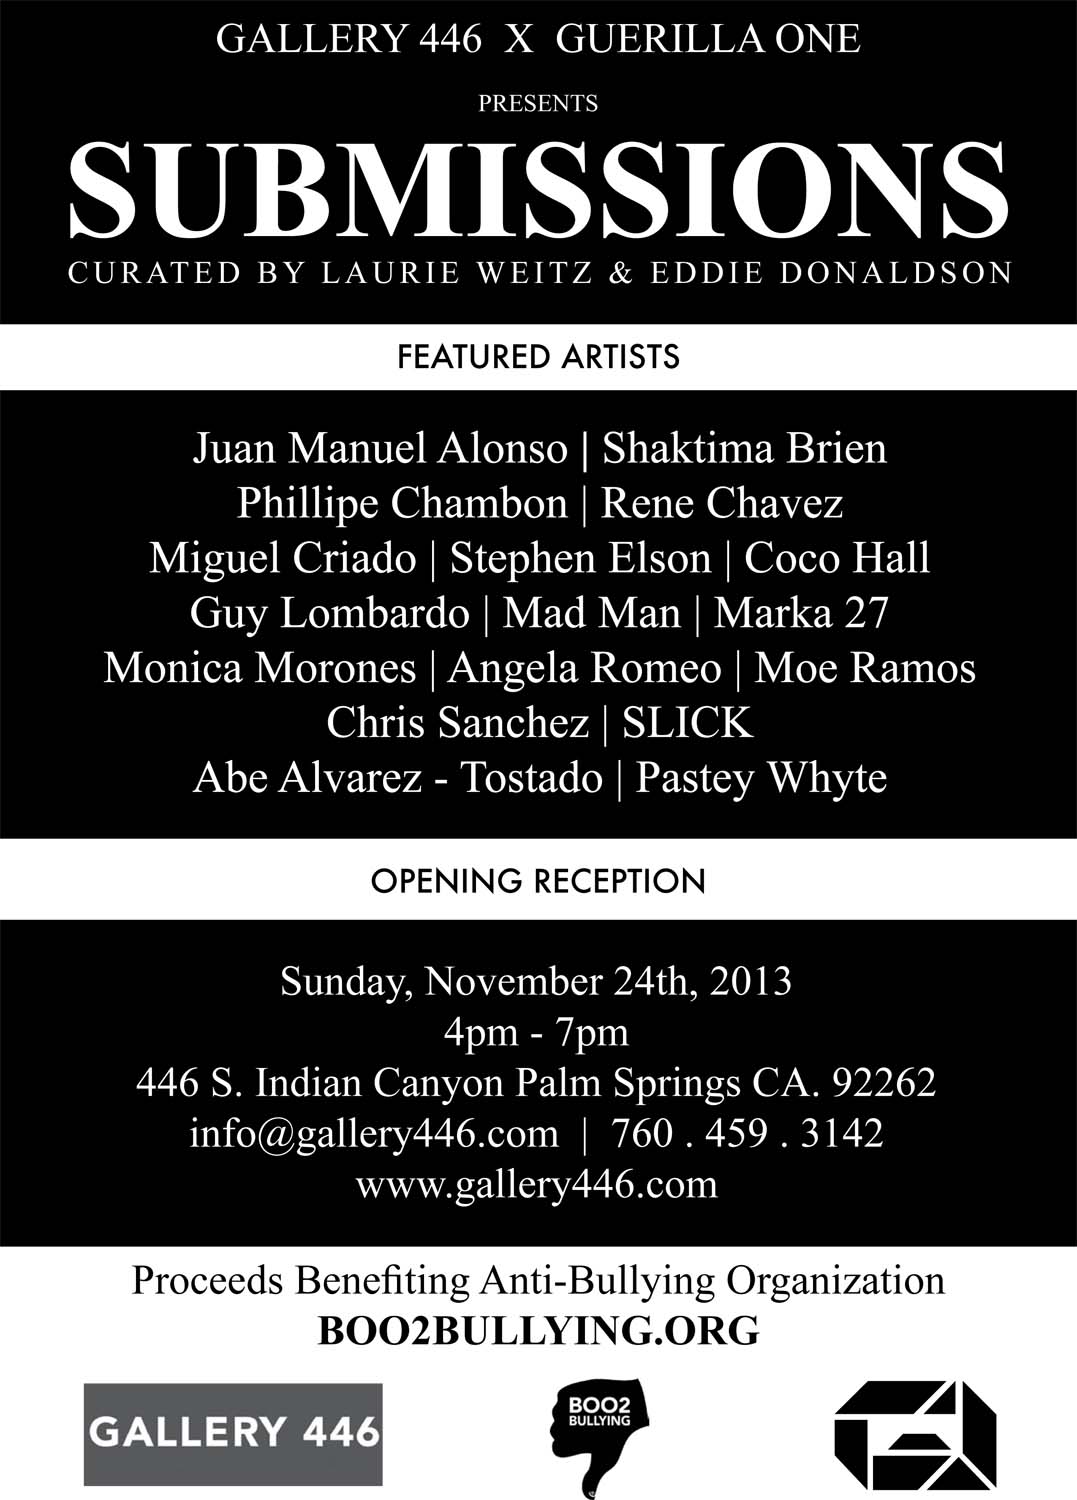 Submissions - November 24th, 2013. Gallery 446 Palm Springs, California 92262.